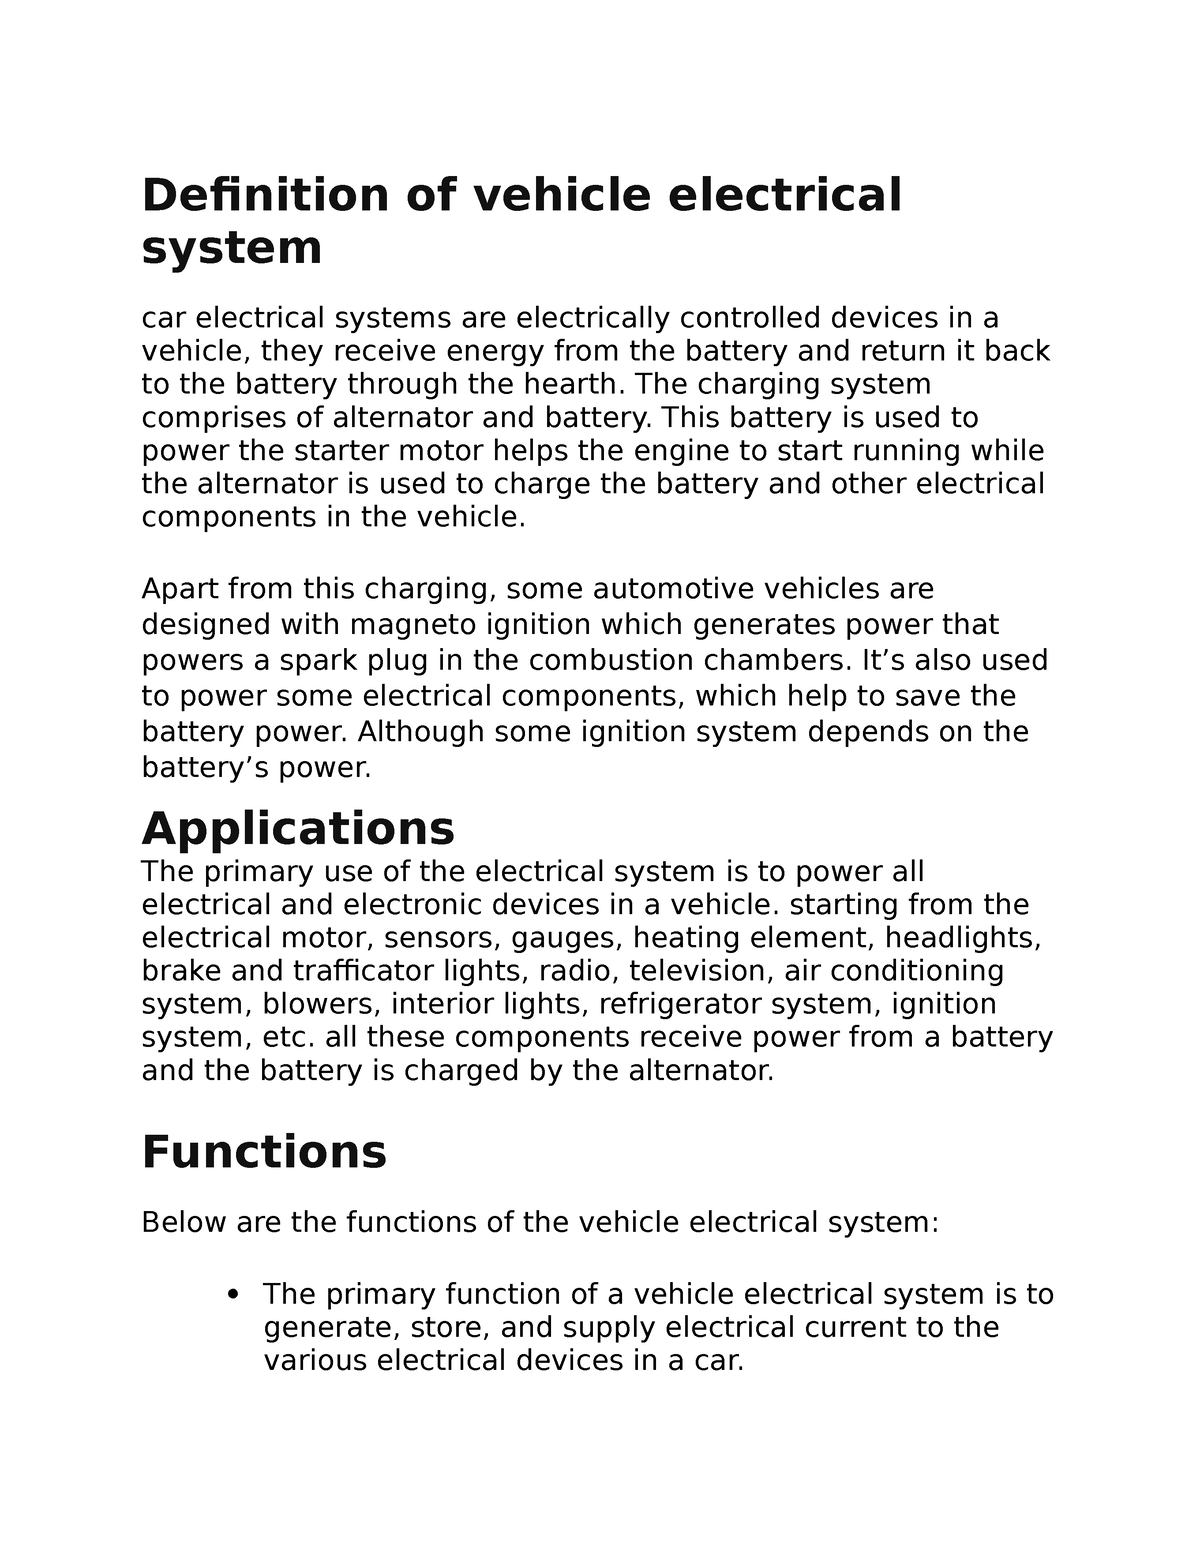 Electrical system Ravi K notes Definition of vehicle electrical